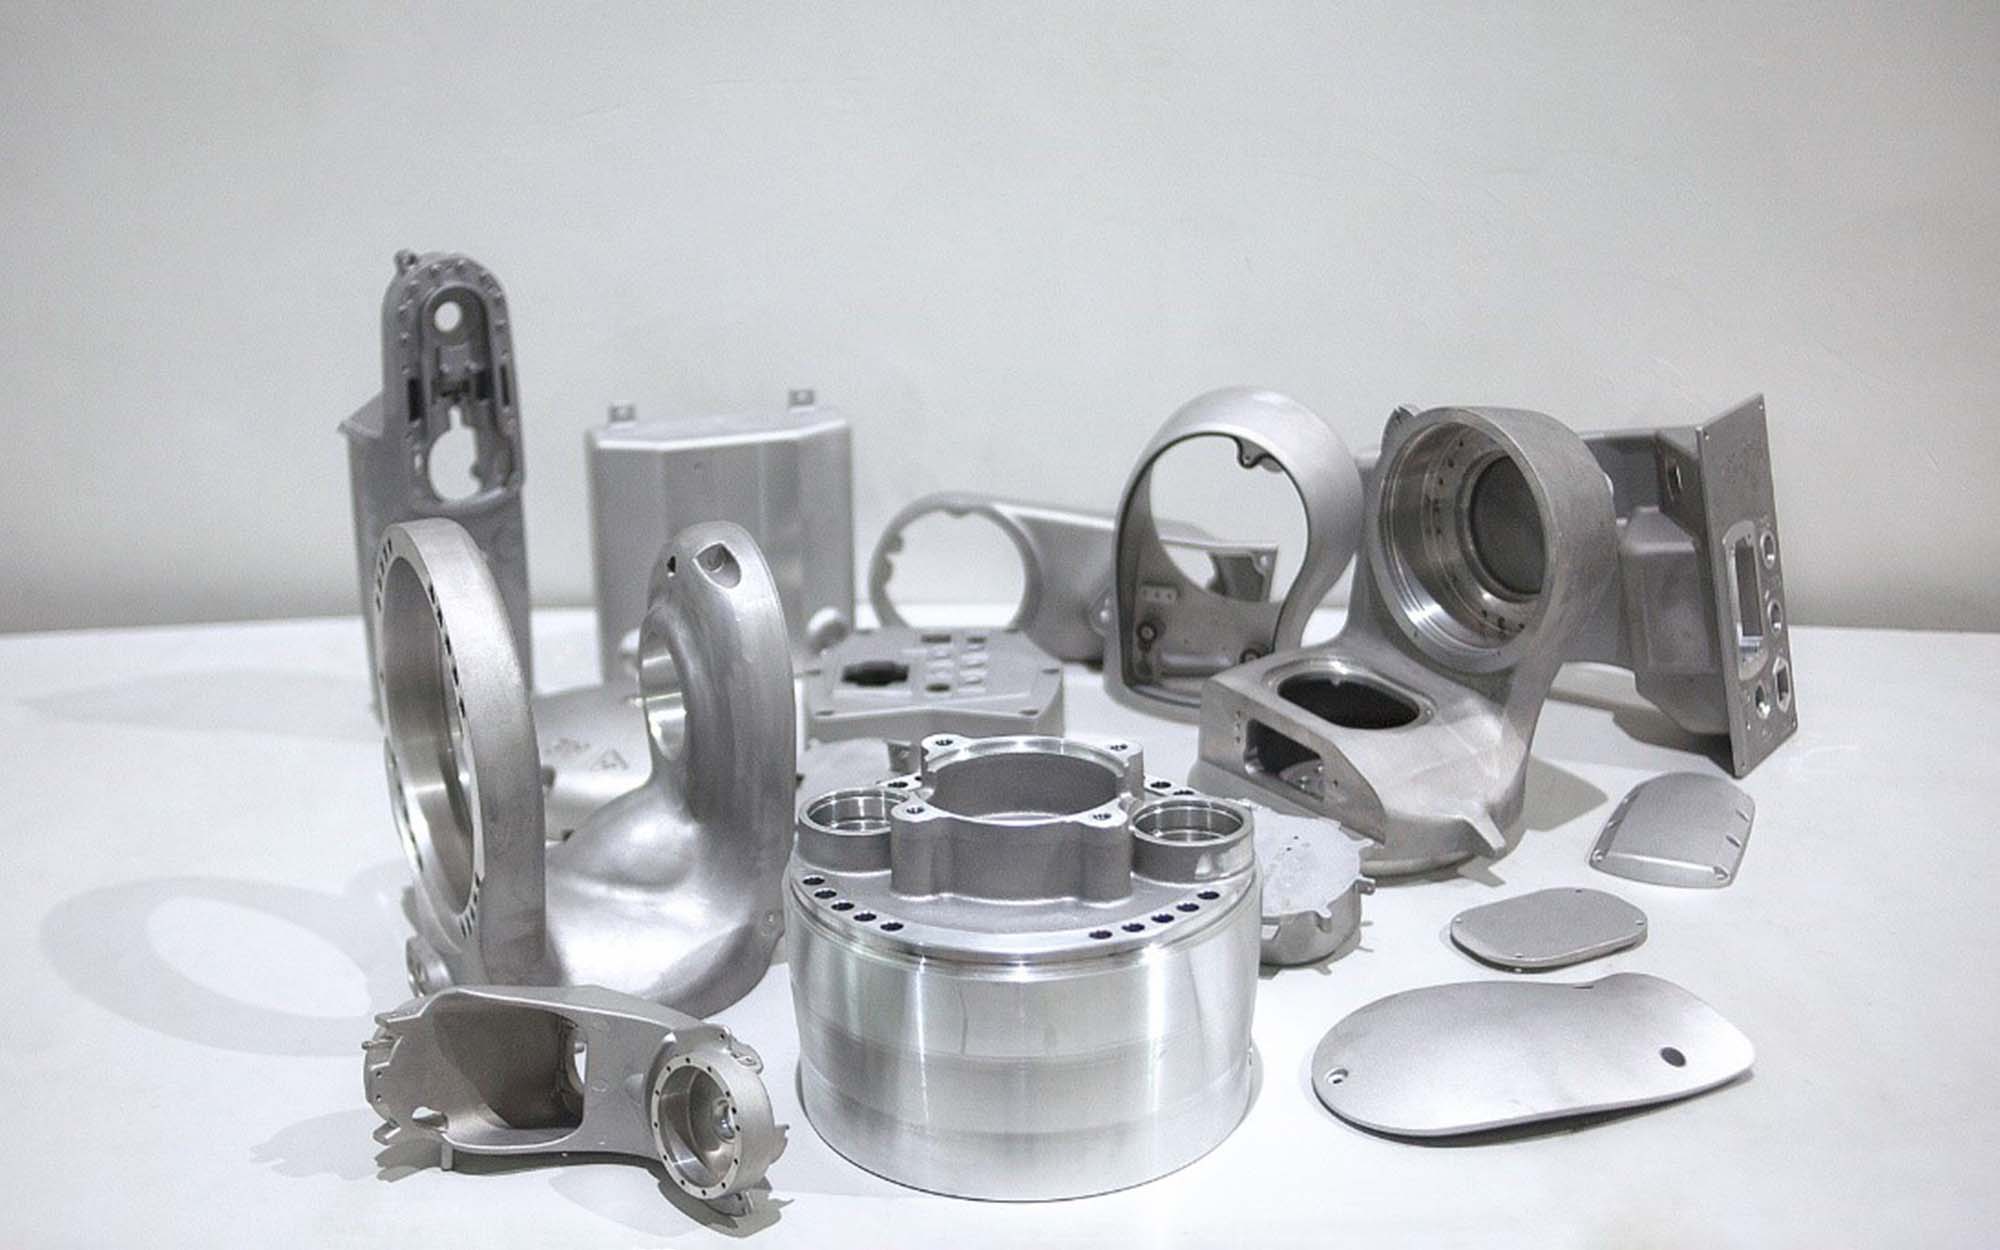 For over 20 years, Grenzebach has been manufacturing high-quality casting parts for the international industry - from iron to steel and aluminum castings to forged parts. Custom-ers benefit from the specialist's wide range of services throughout the complete supply chain. (c) Grenzebach